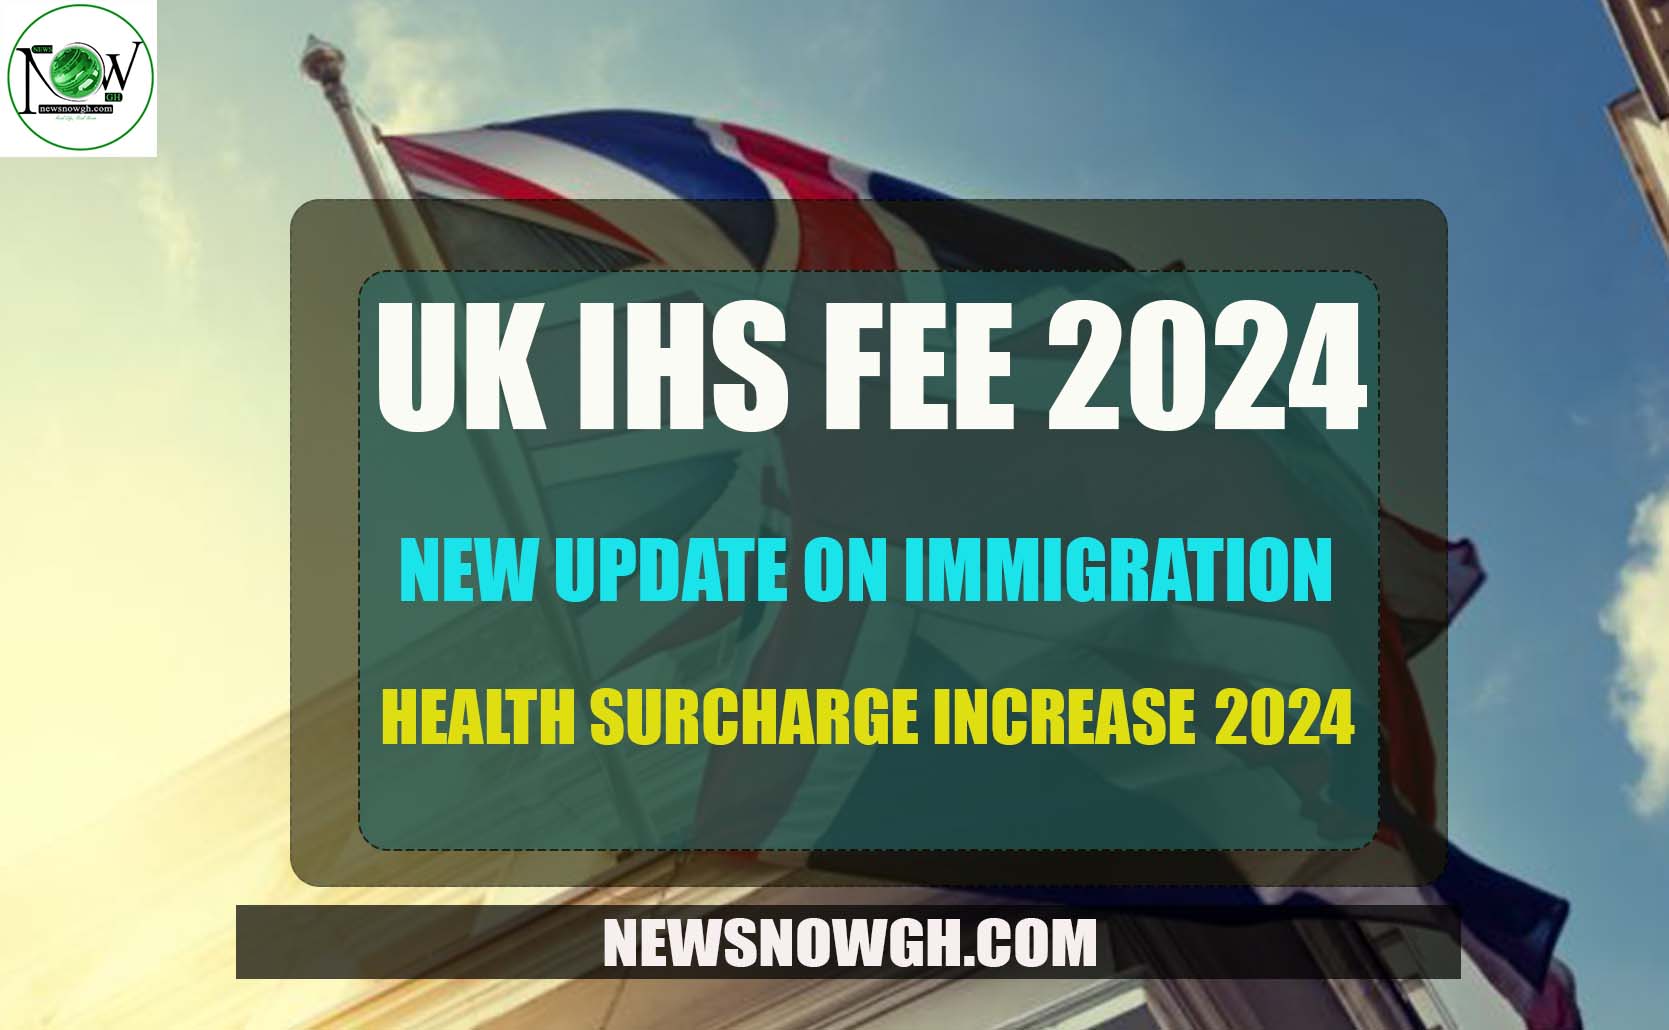 New Update on Immigration Health Surcharge Increase 2024